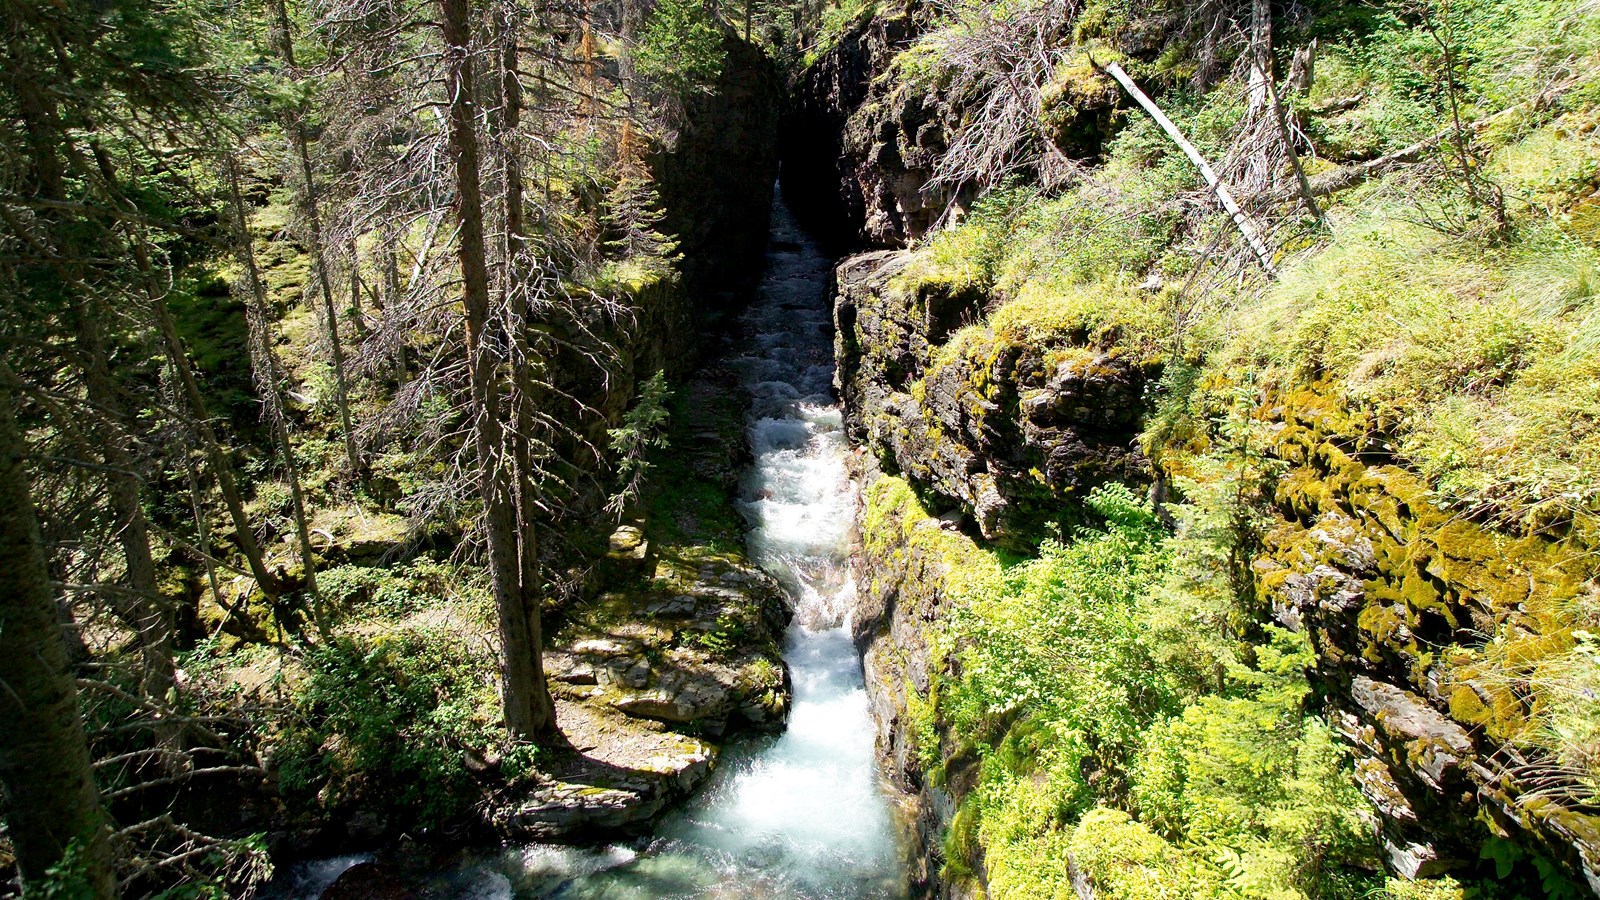 A deep, narrow gorge with a creek flowing through it